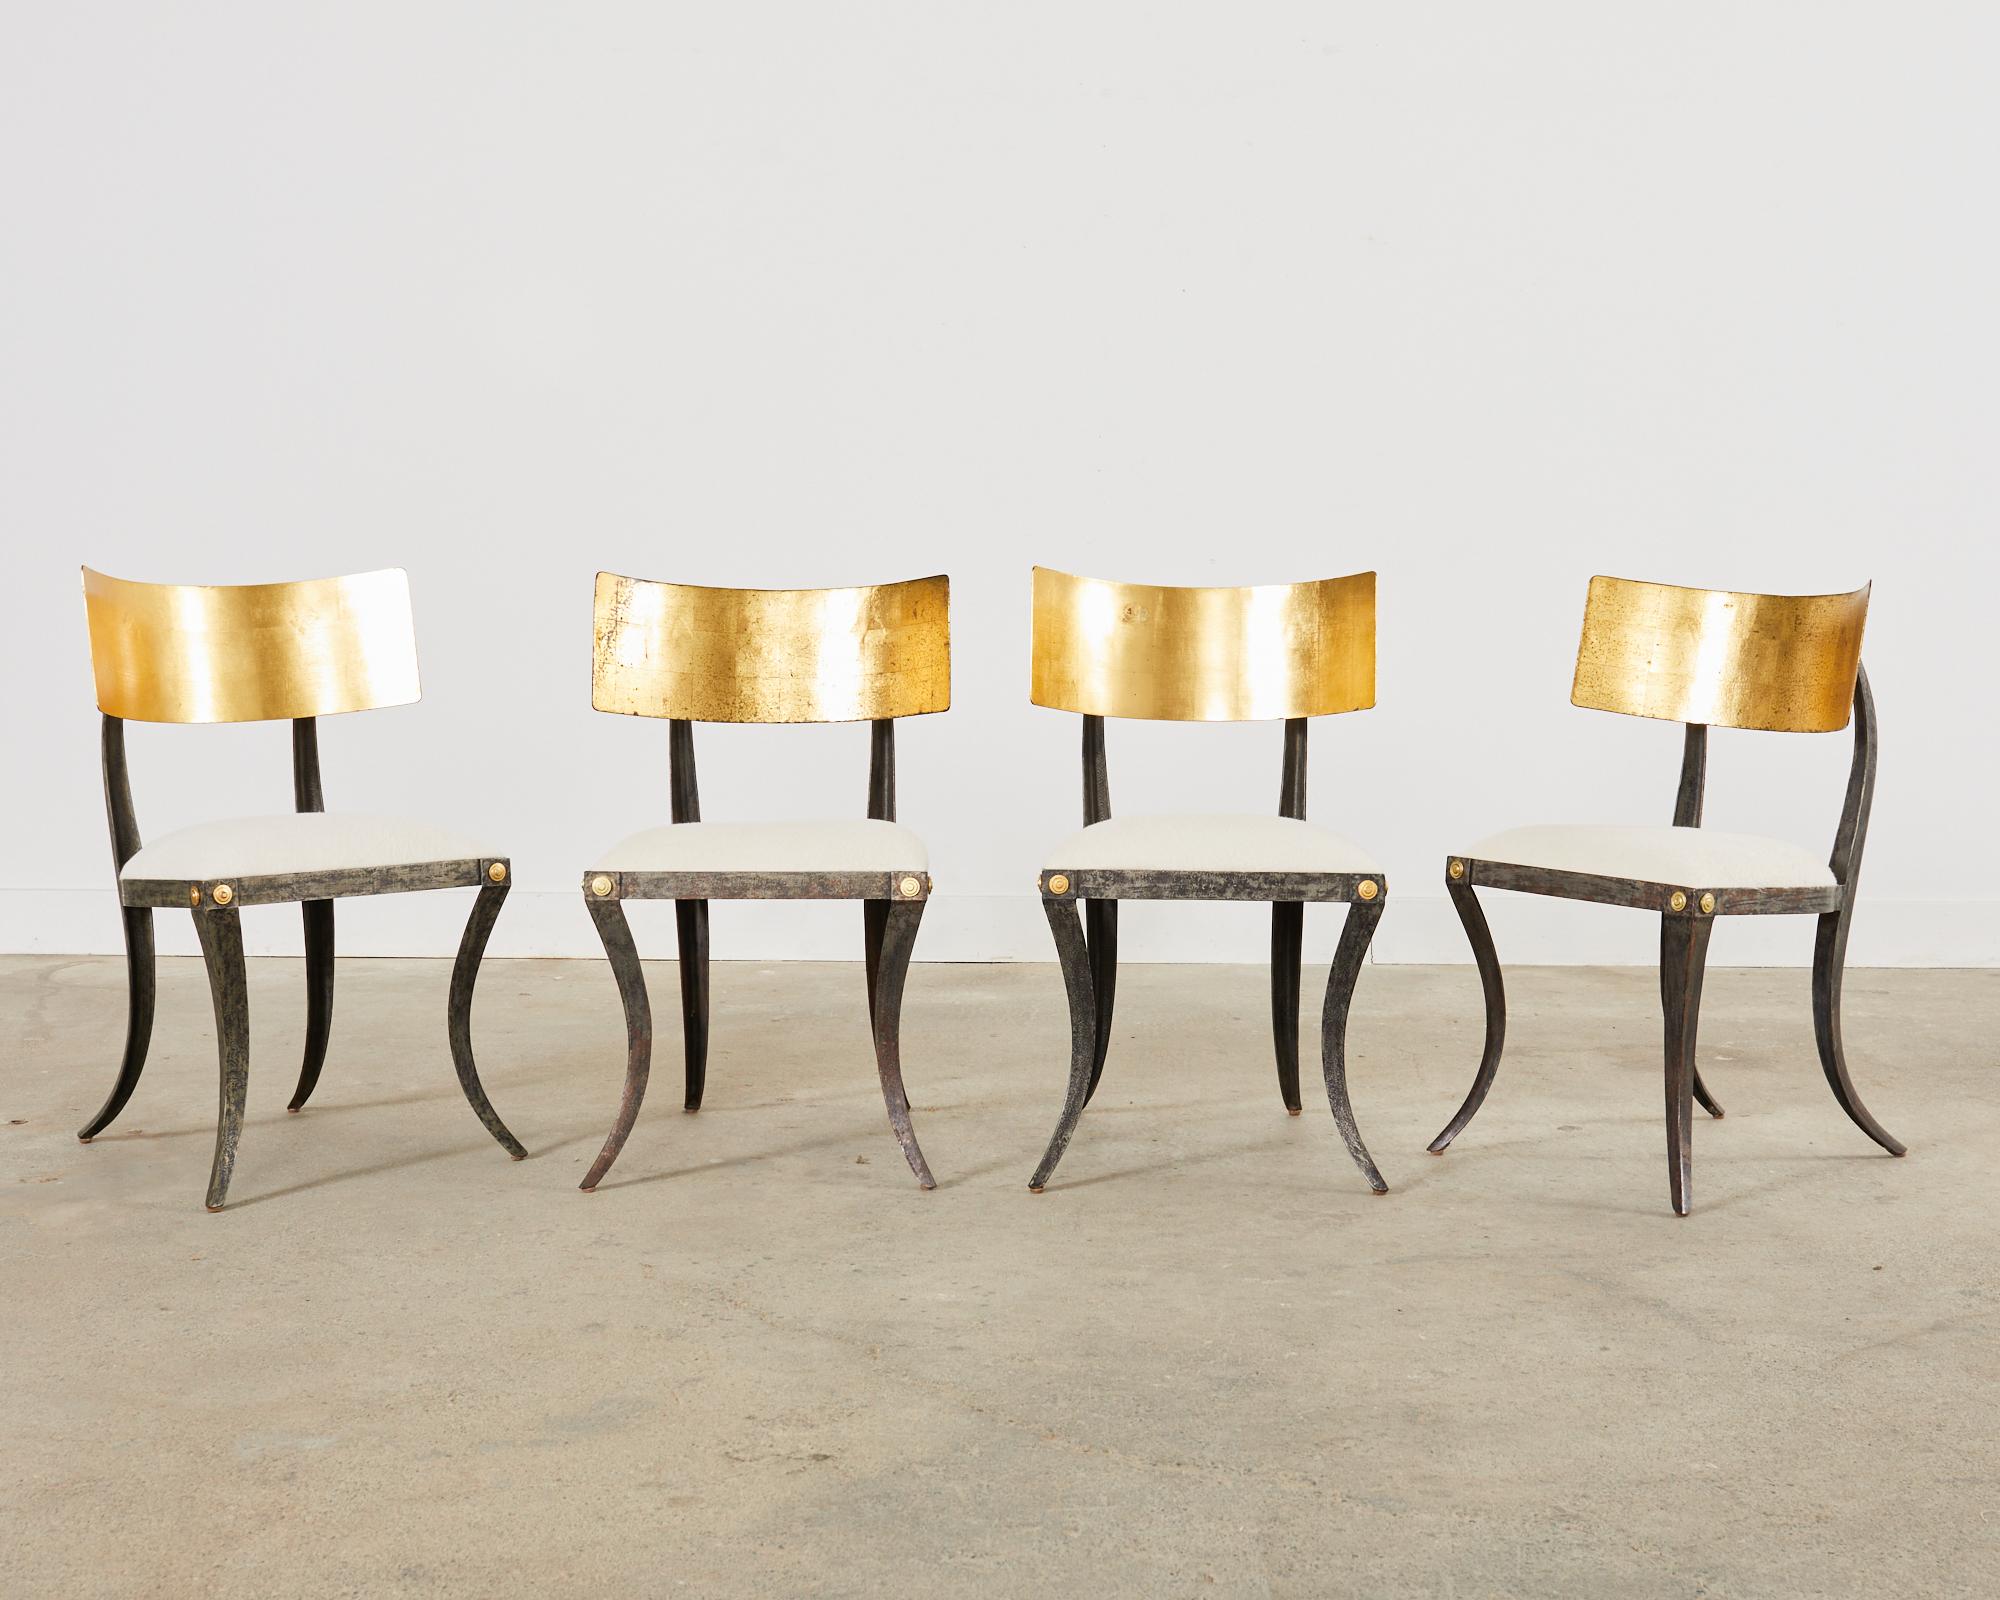 Philippine Set of Four Gilt Iron Klismos Chairs by Ched Berenguer-Topacio